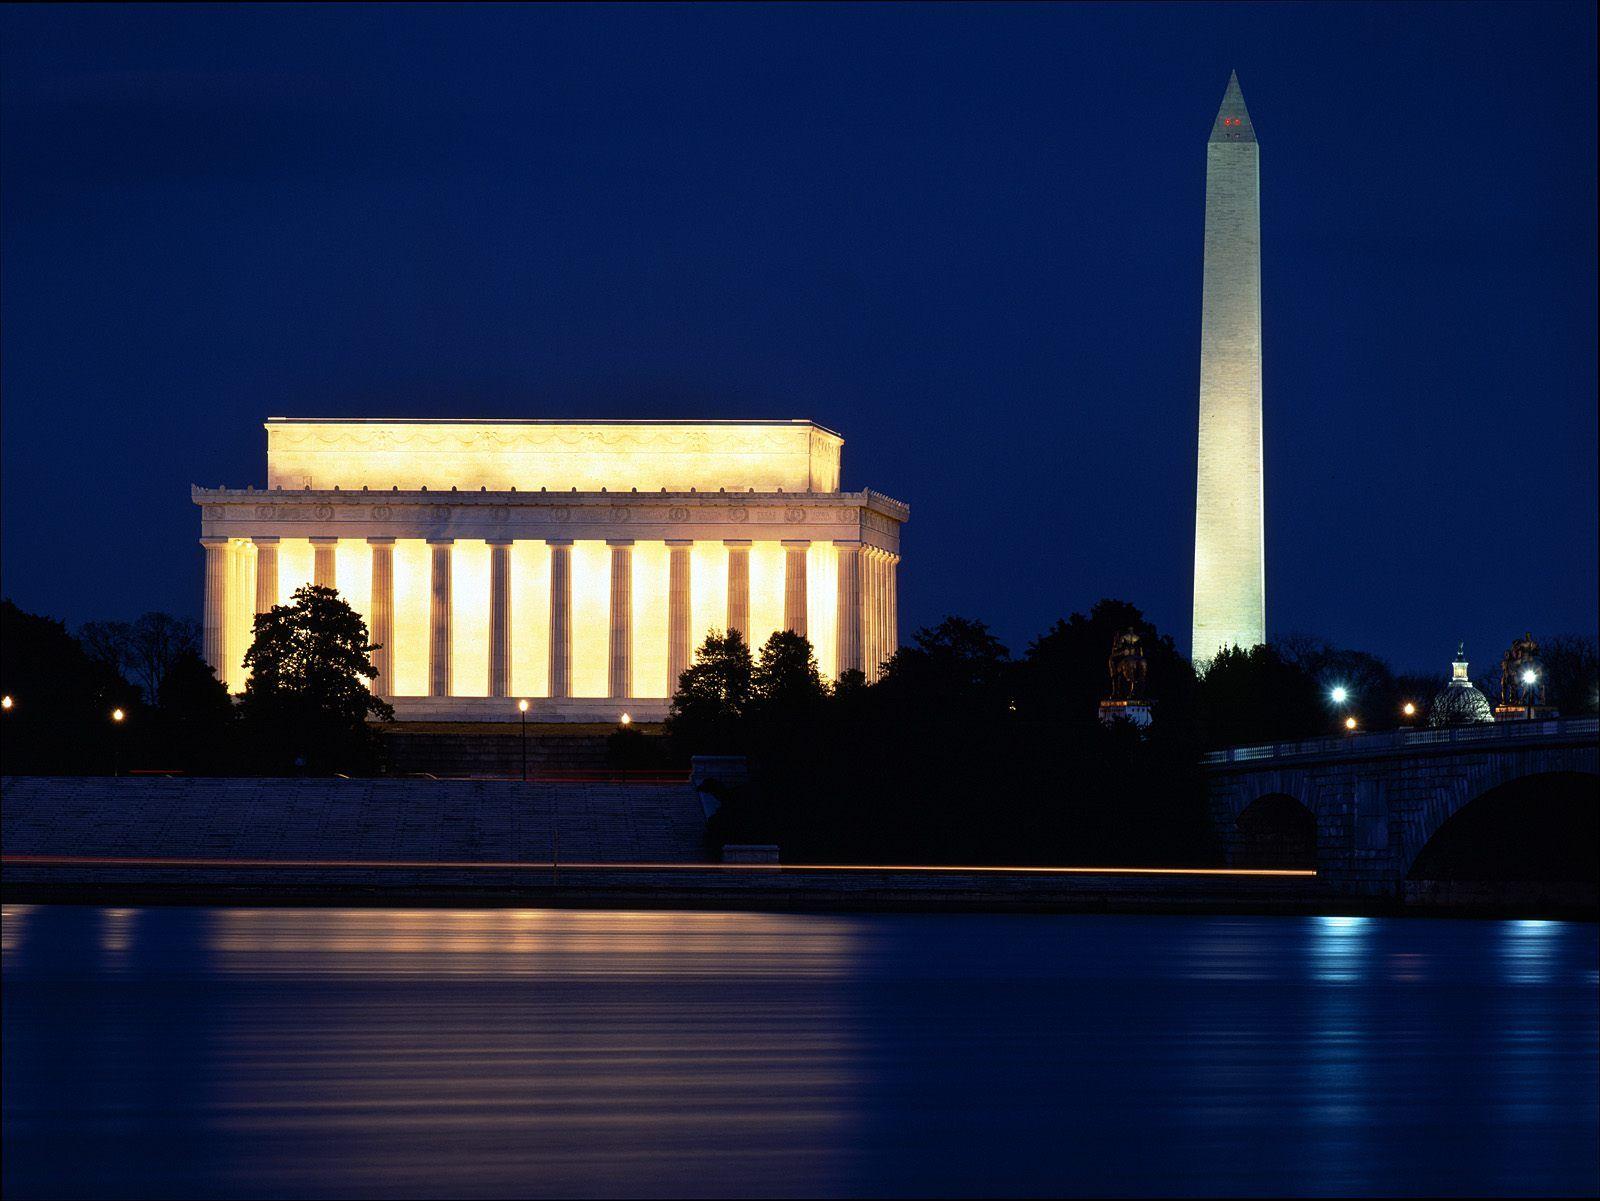 Washington DC Wallpaper for PC. Full HD Picture